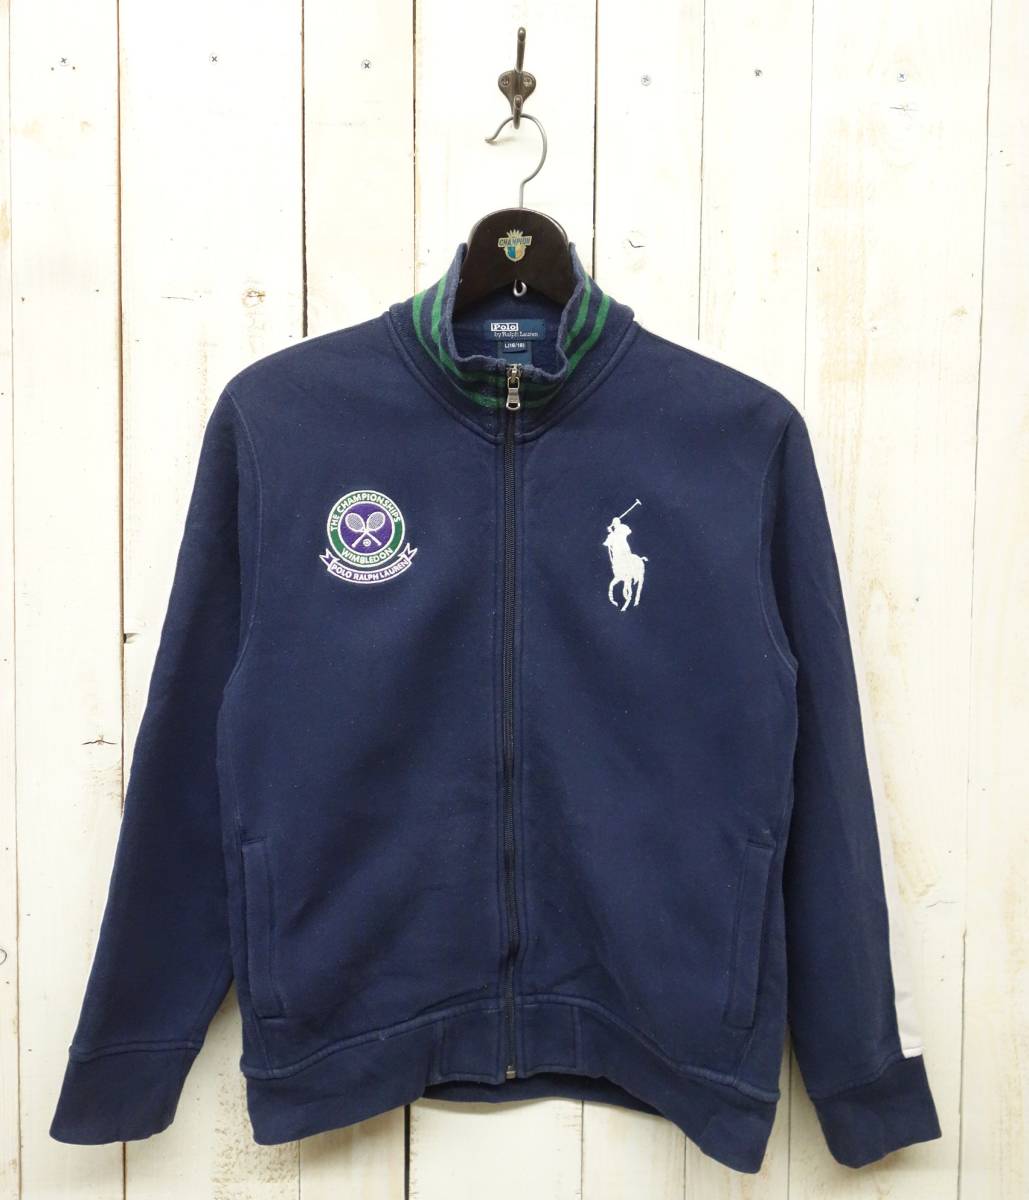  old clothes . Europe buying up *POLO BY RALPH LAUREN Polo Ralph Lauren * sweat jacket full Zip *L(16-18) *EUROPE